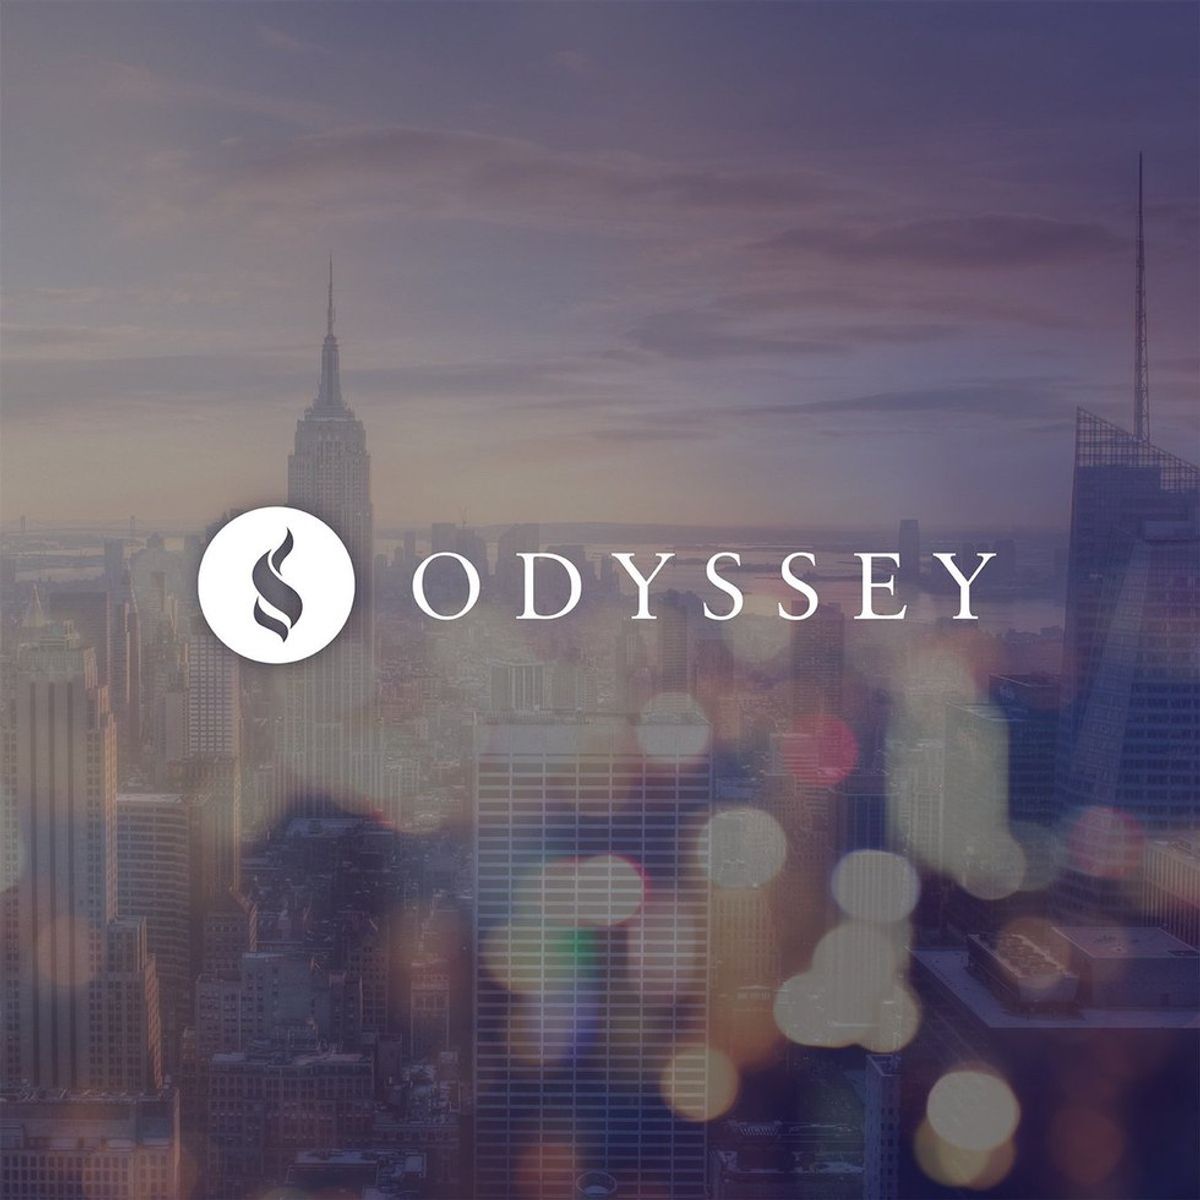 7 Things I've Learned Being A Writer For The Odyssey